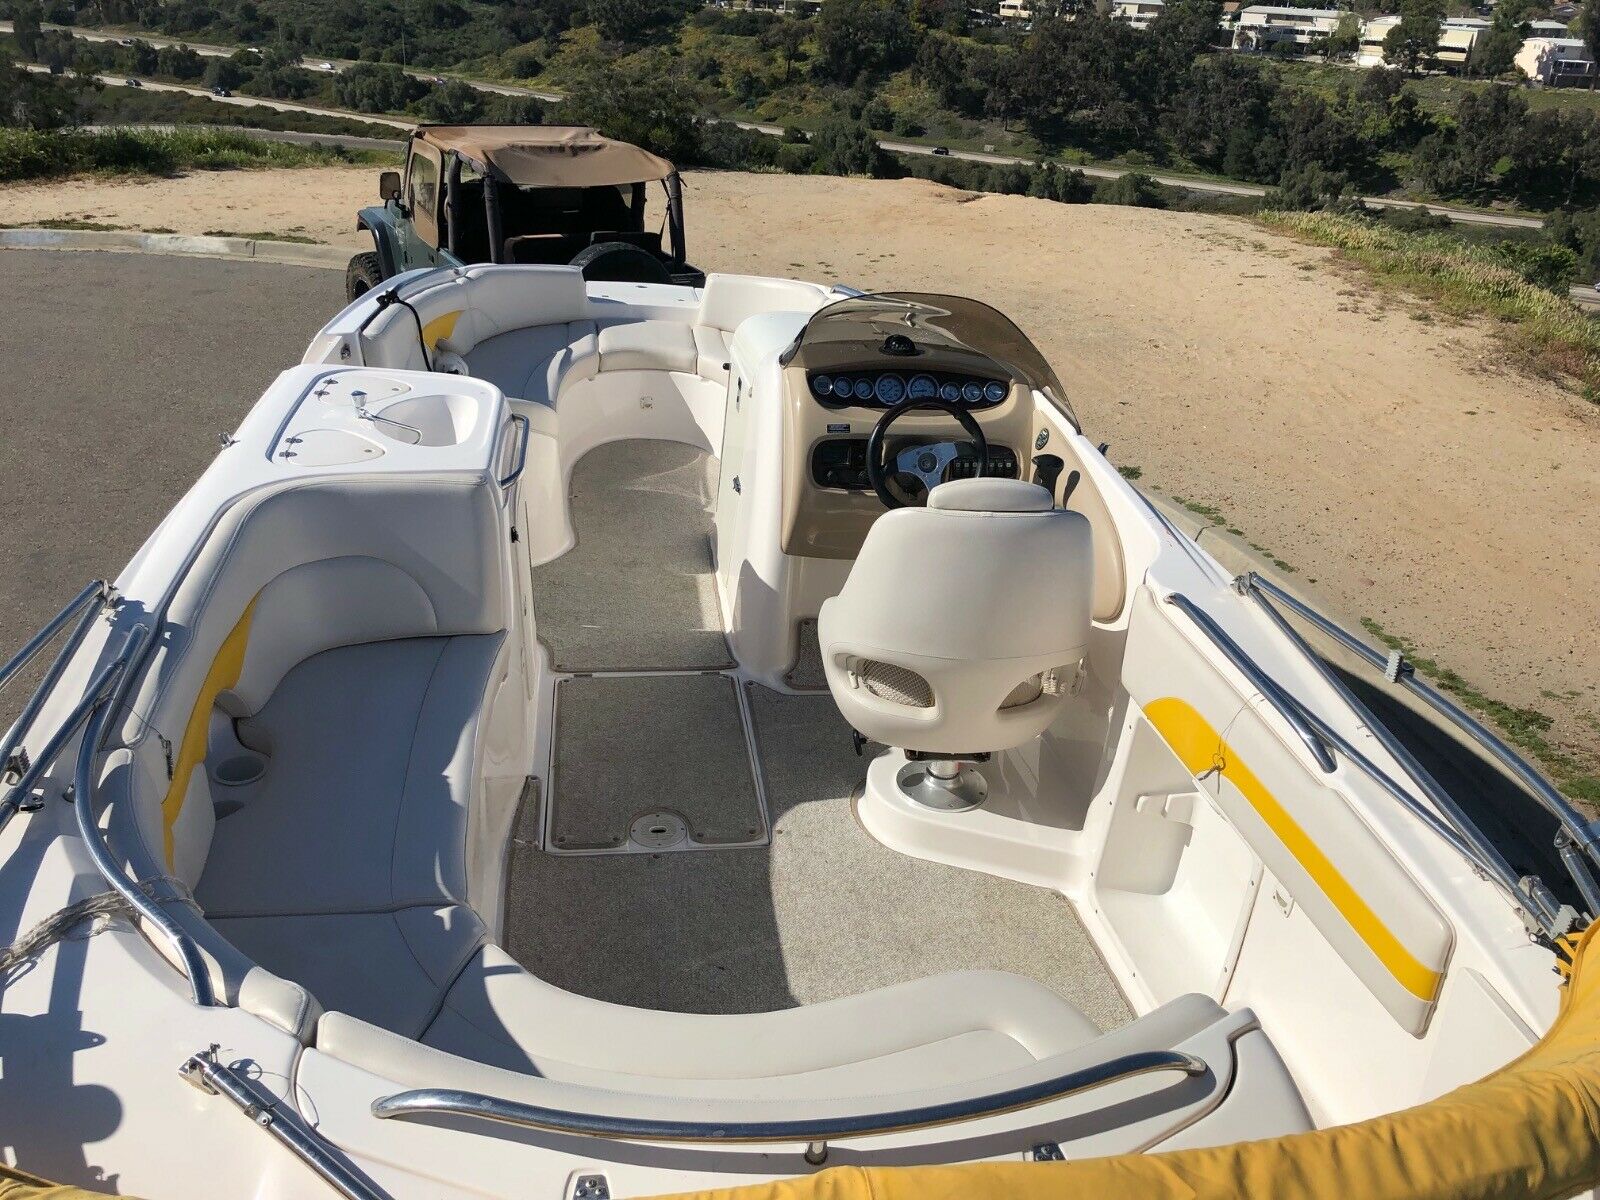 Chaparral 2003 for sale for $20,250 - Boats-from-USA.com